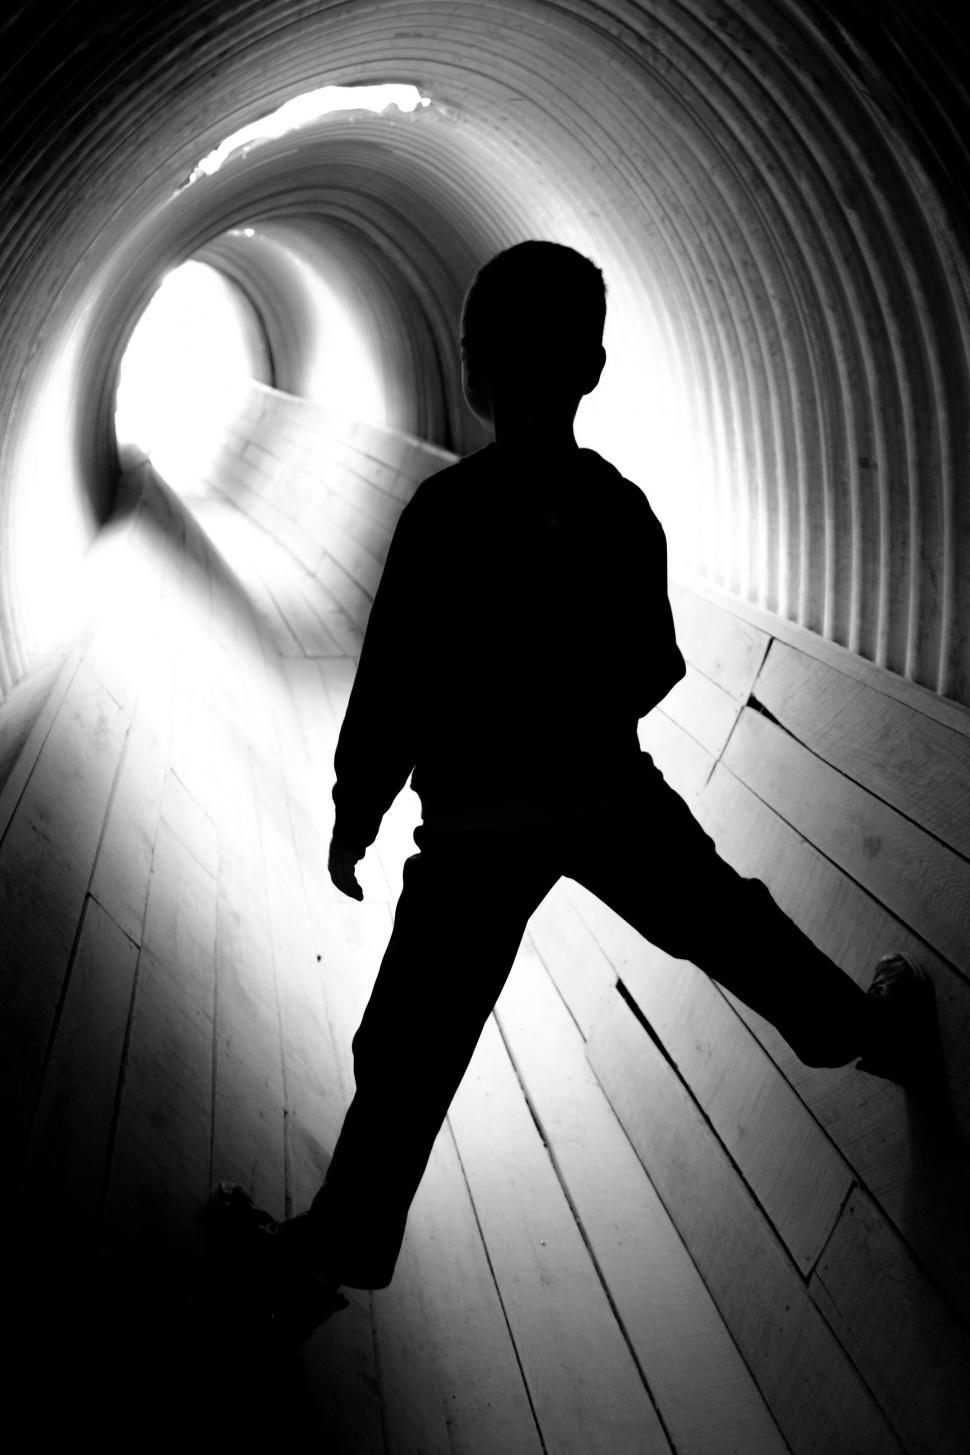 Free Image of Black and White View of Little Boy in Tunnel  